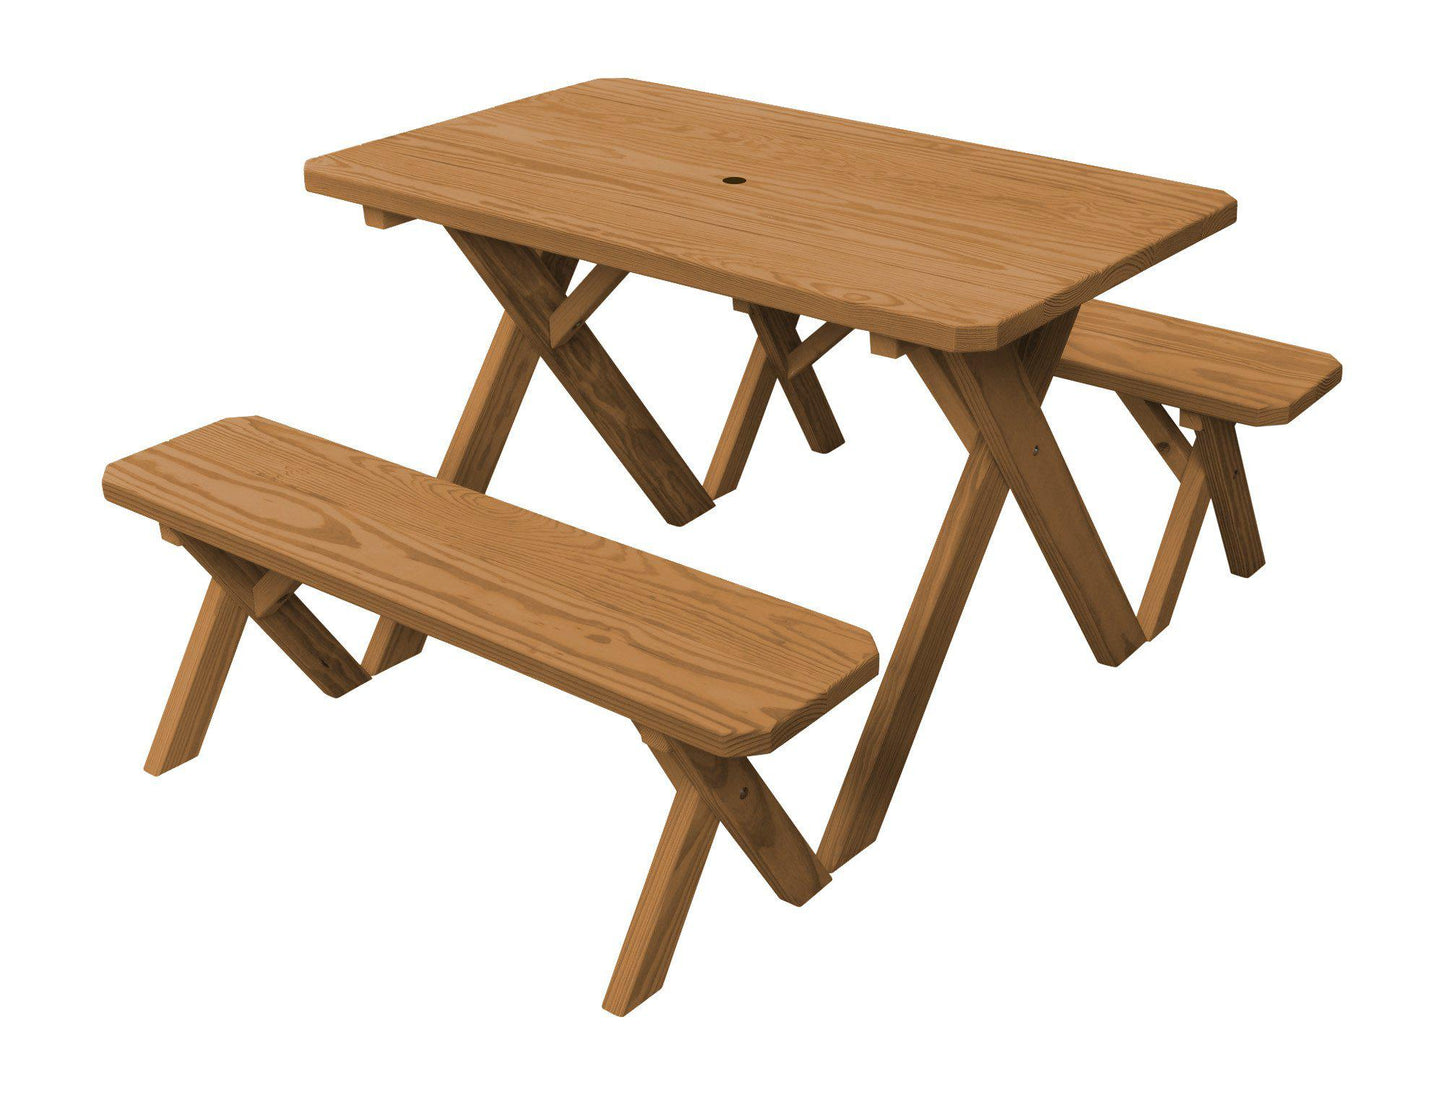 A&L Furniture Co. Yellow Pine 44"' Cross-leg Table w/2 Benches - Umbrella Hole - LEAD TIME TO SHIP 10 BUSINESS DAYS